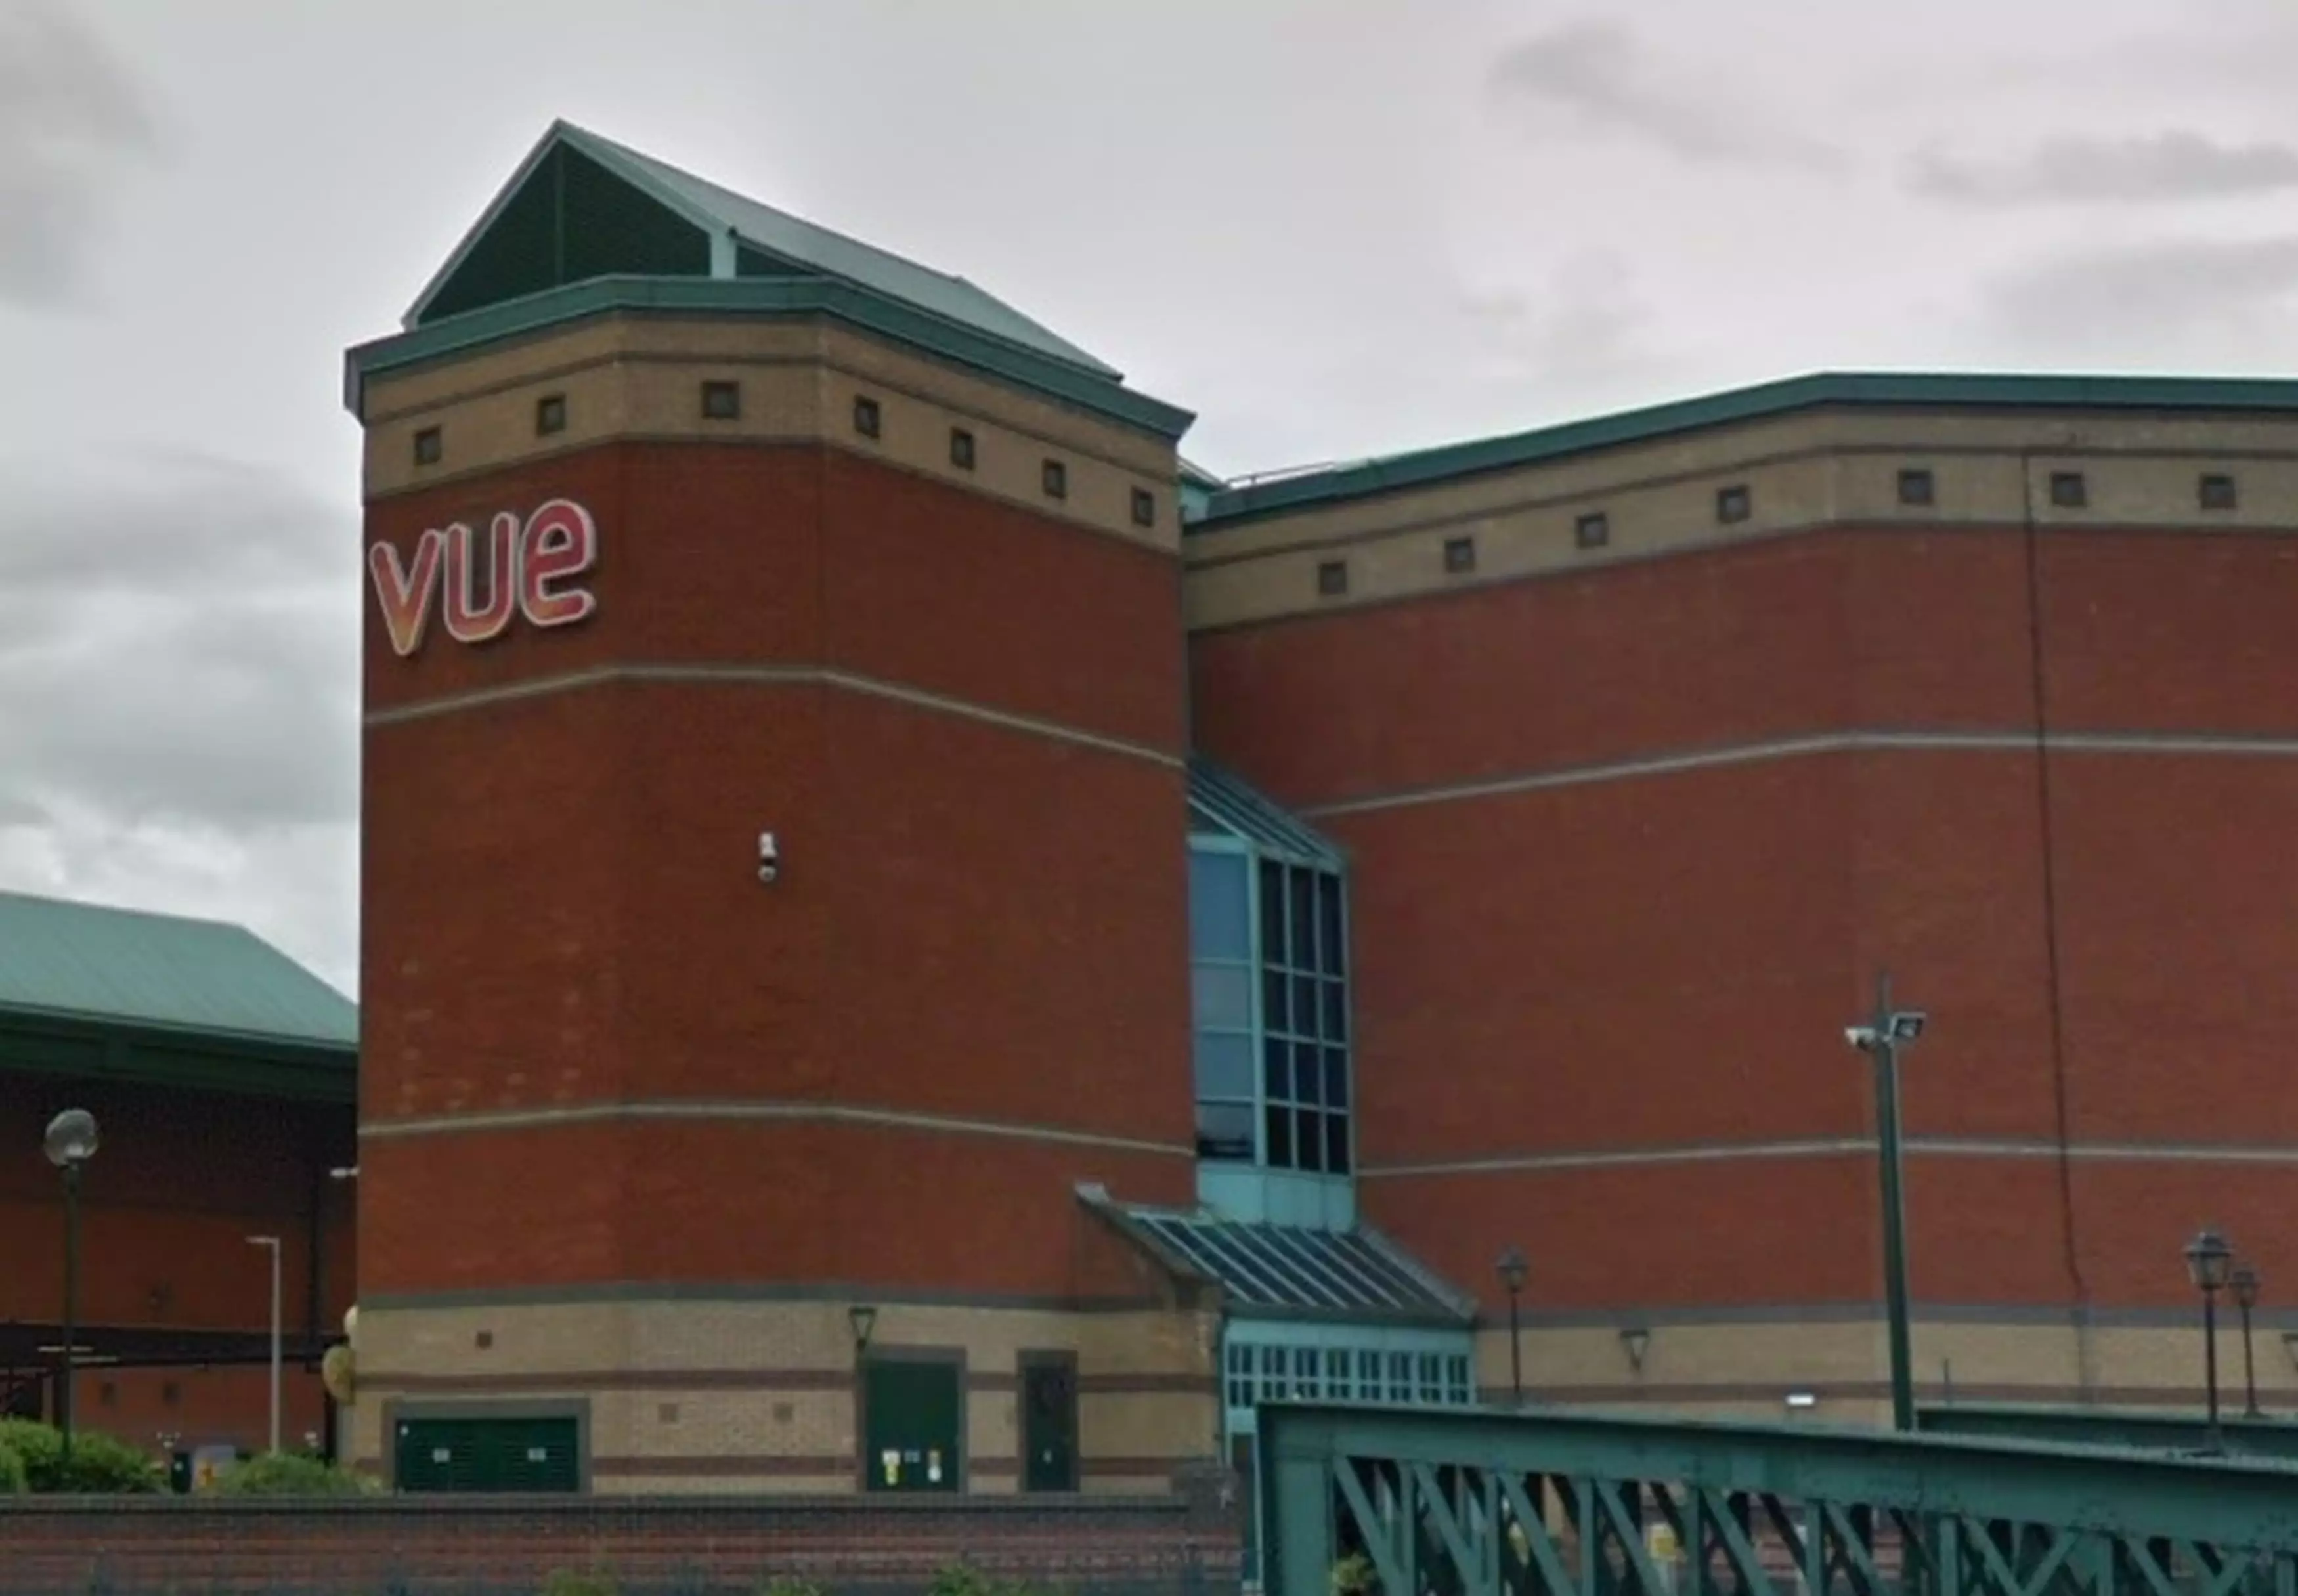 The incident happened at Vue Cinema in Meadowhall, Sheffield (